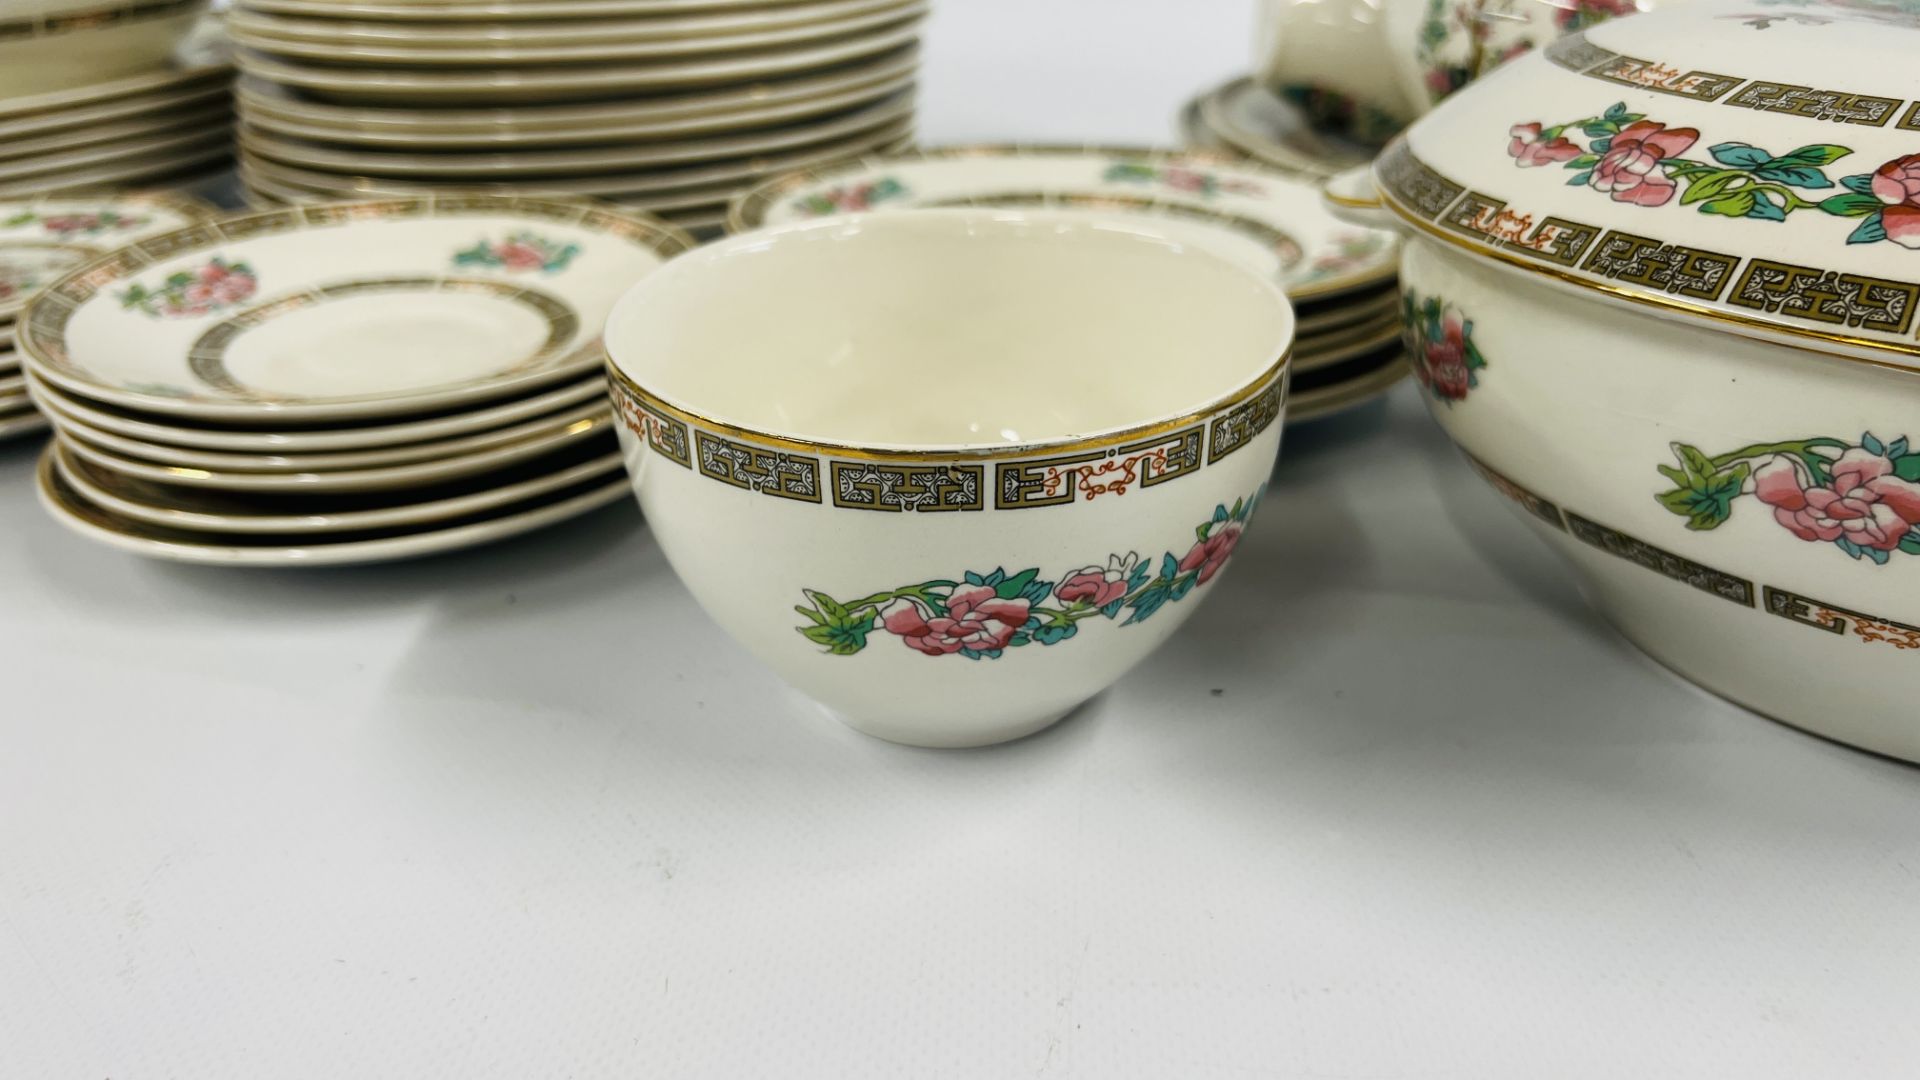 55 PIECES OF WEDGEWOOD INDIAN TREE DINNERWARE INCLUDING PLATES, CUPS, SAUCERS, TUREENS ETC. - Image 4 of 10